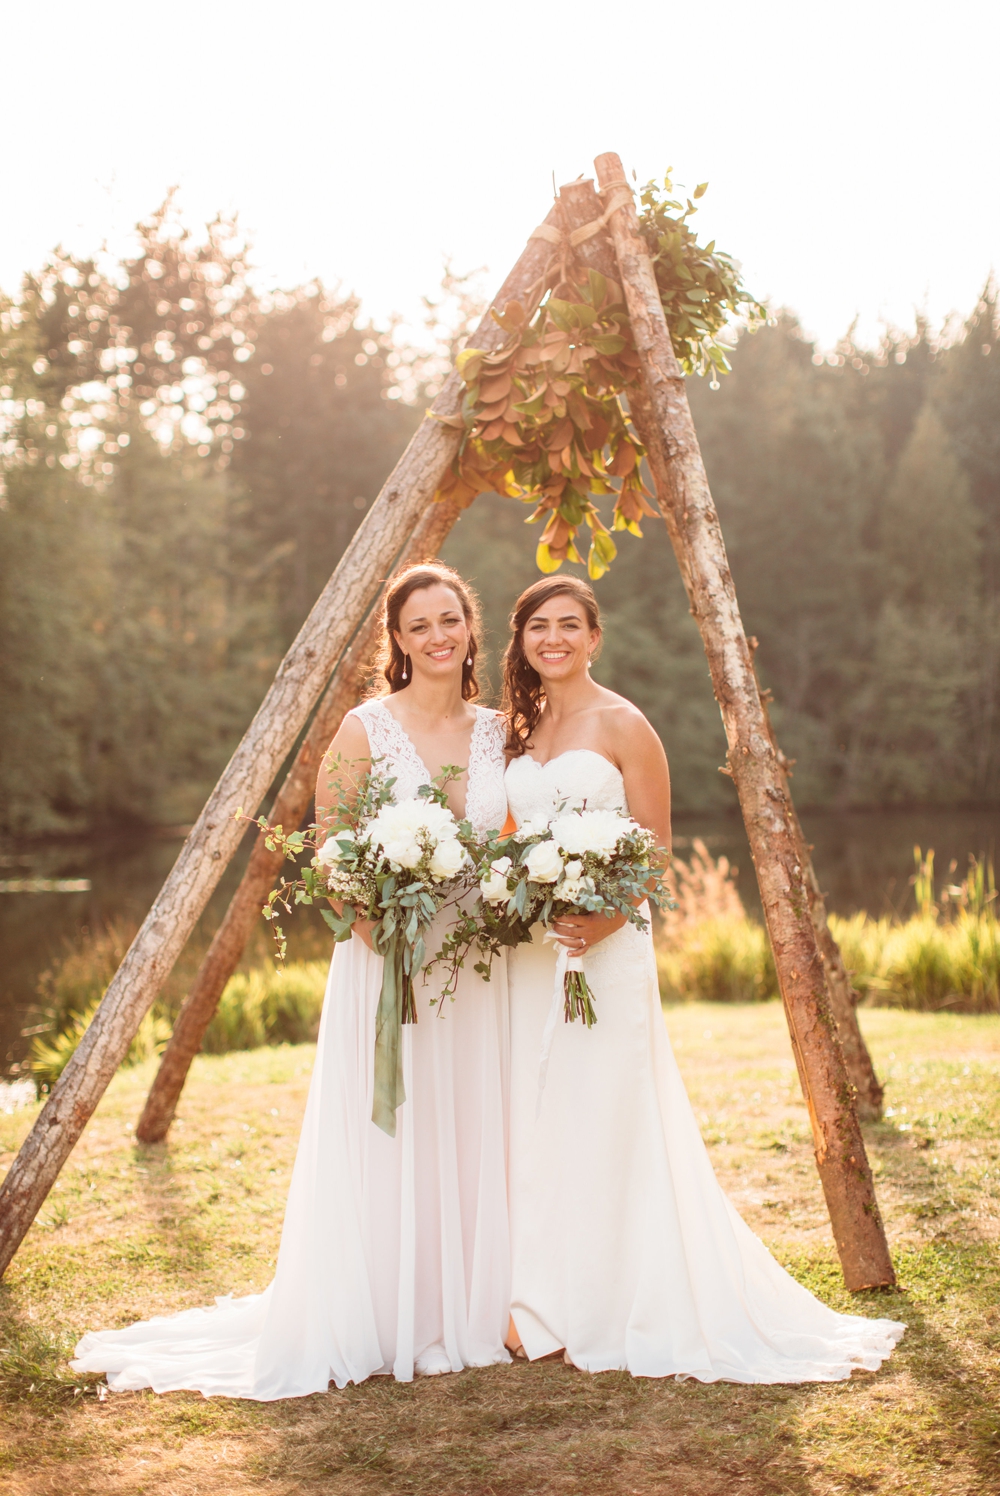 brides-hold-white-bouquets-by-wedding-teepee